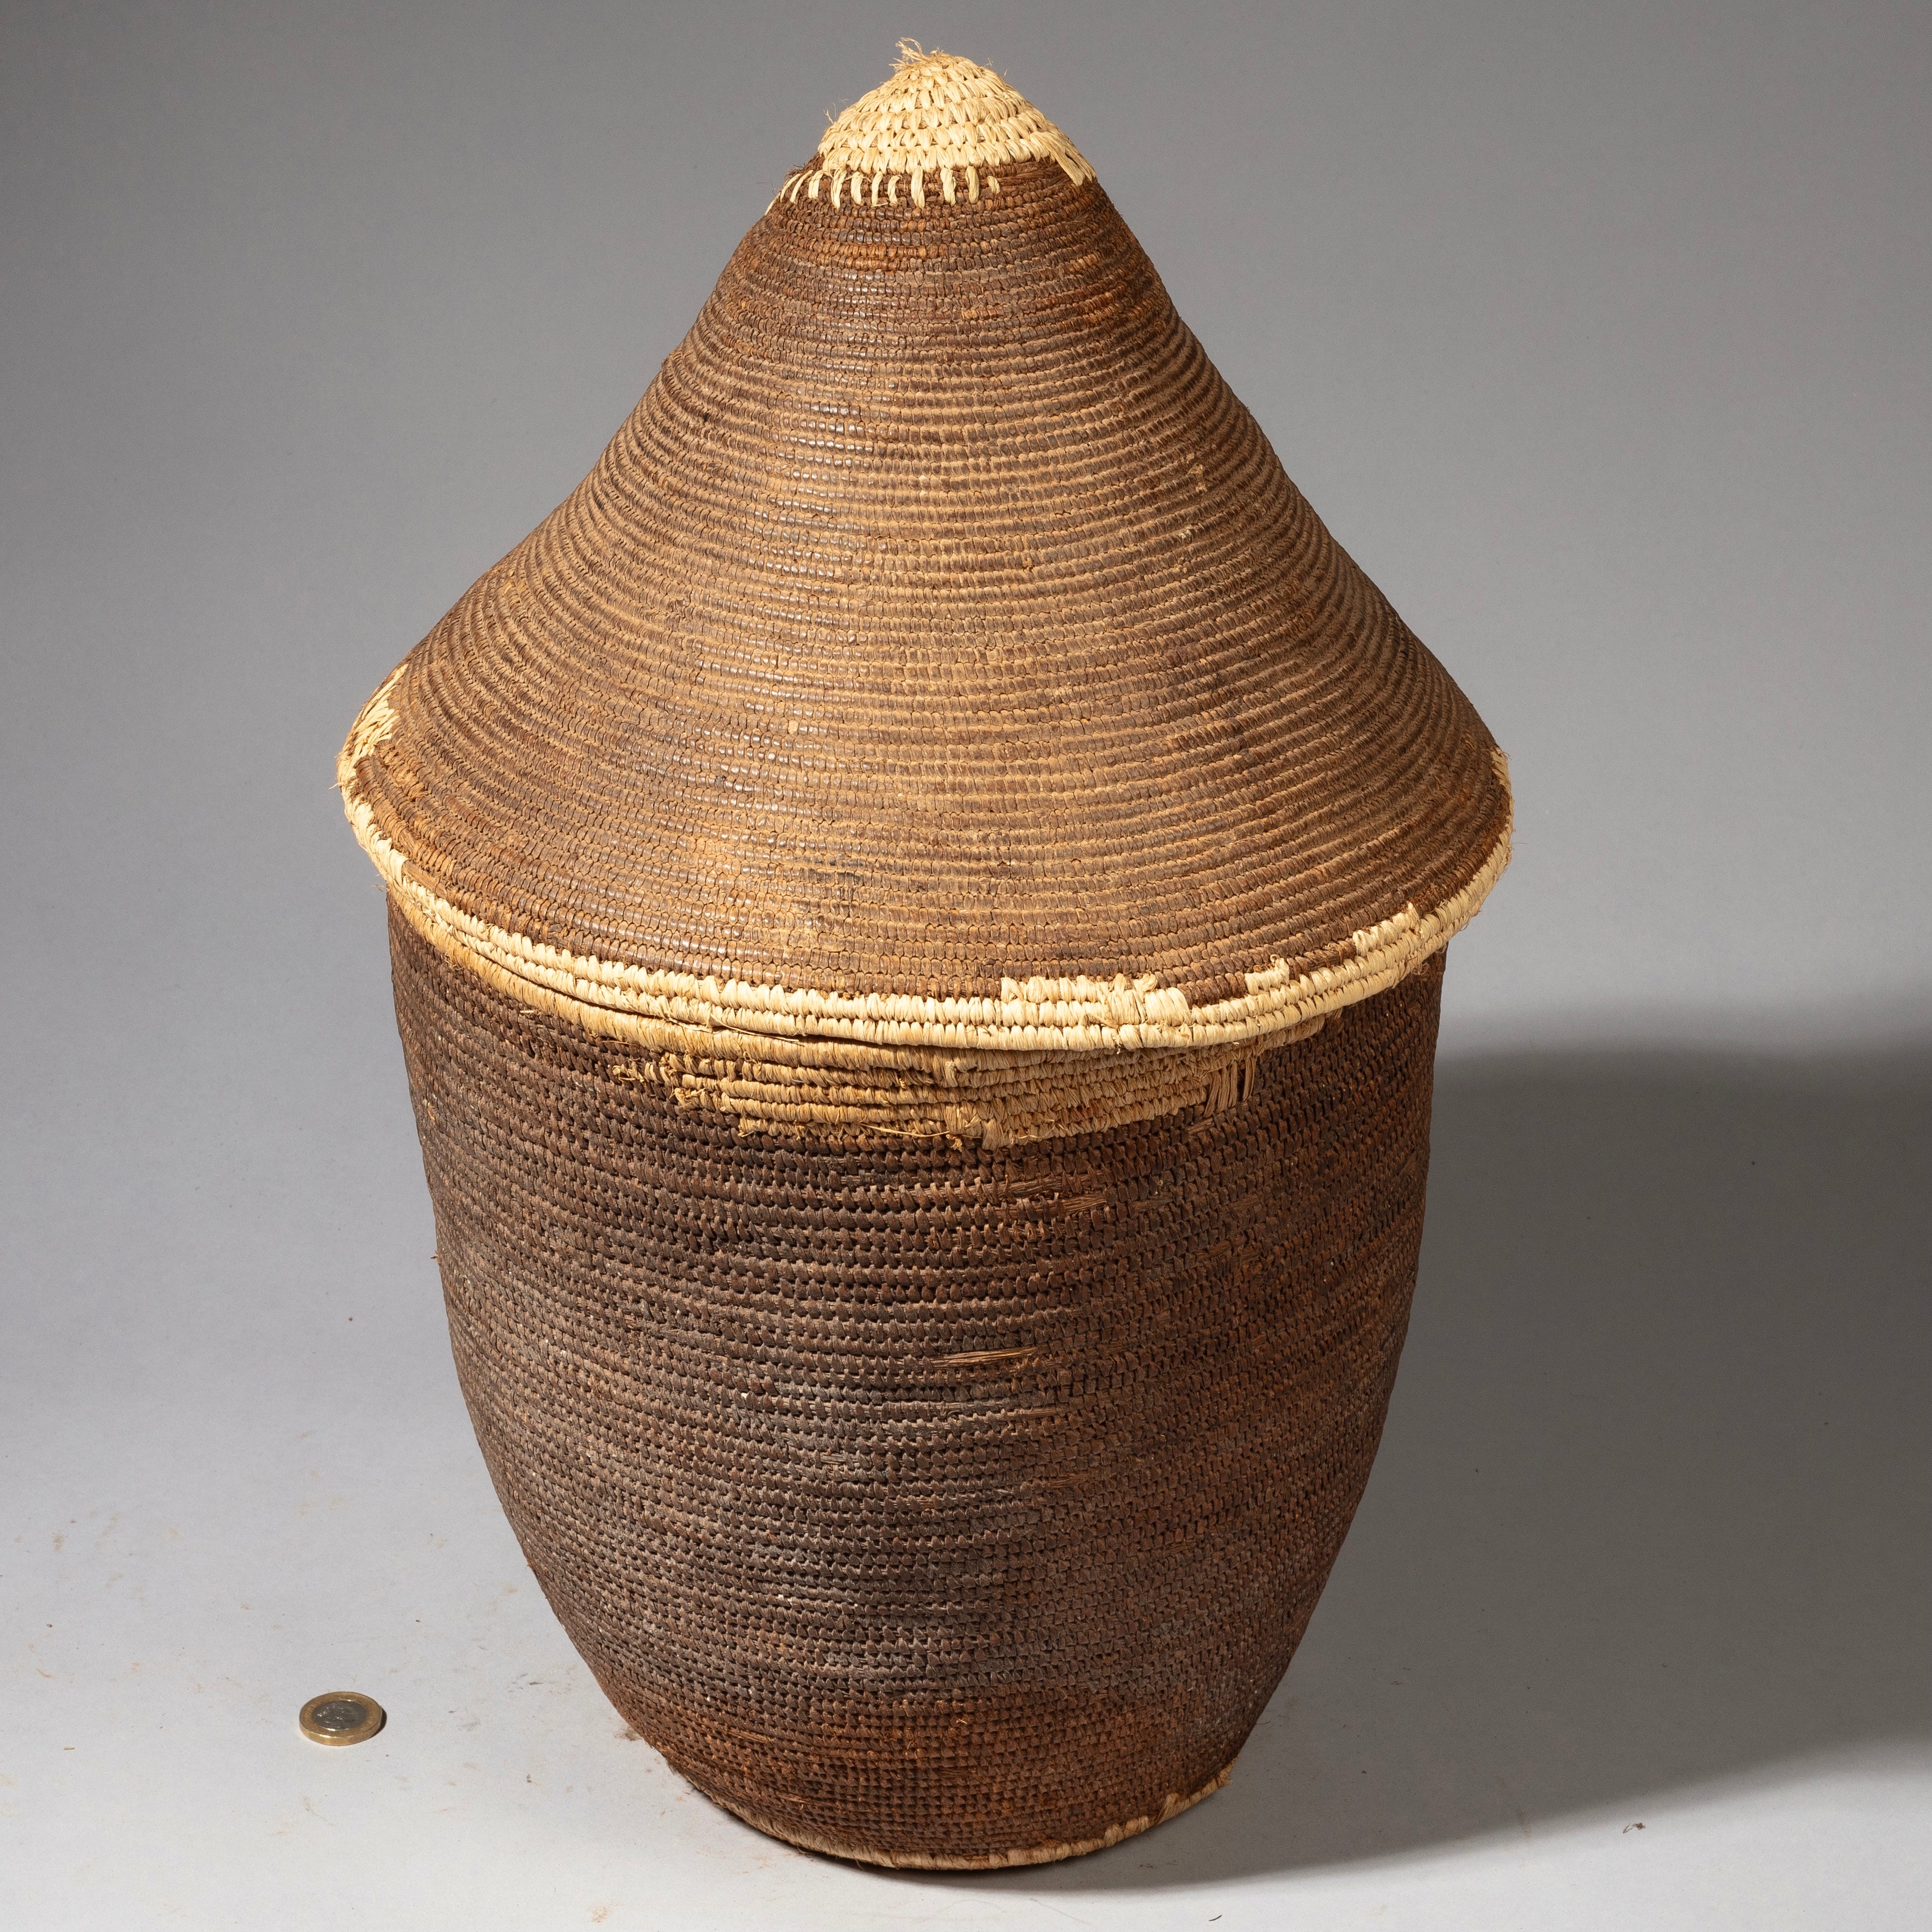 A LOVELY + LARGE FIBRE BASKET WITH LID FROM TUTSI TRIBE RWANDA ( No 2164)